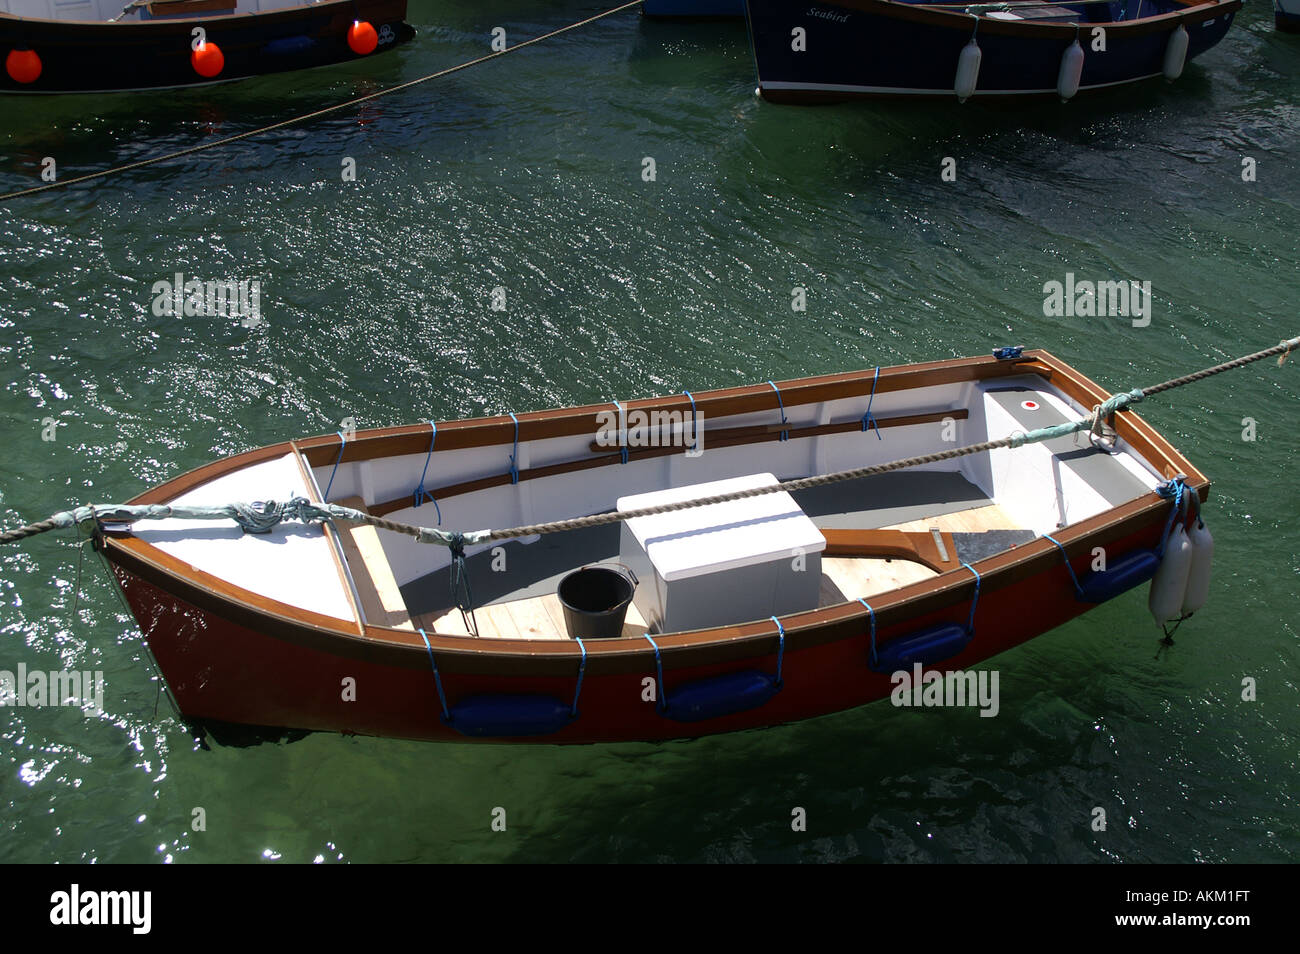 Rowing Boat in a clear with blue bumpers Sea Coverack Harbour Stock Photo